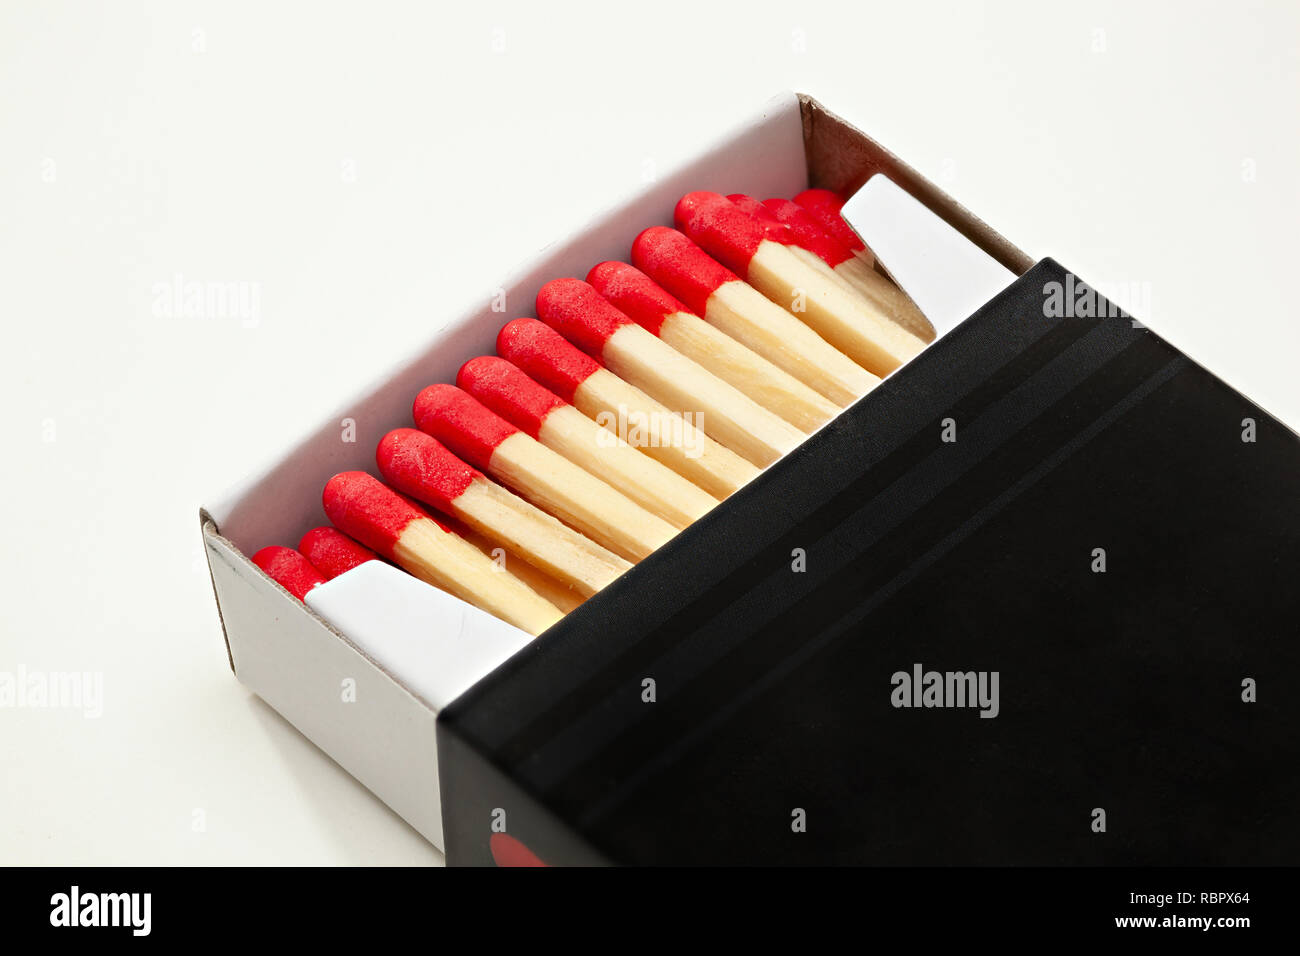 Open cardboard matchbox filled with matches on a white background Stock Photo